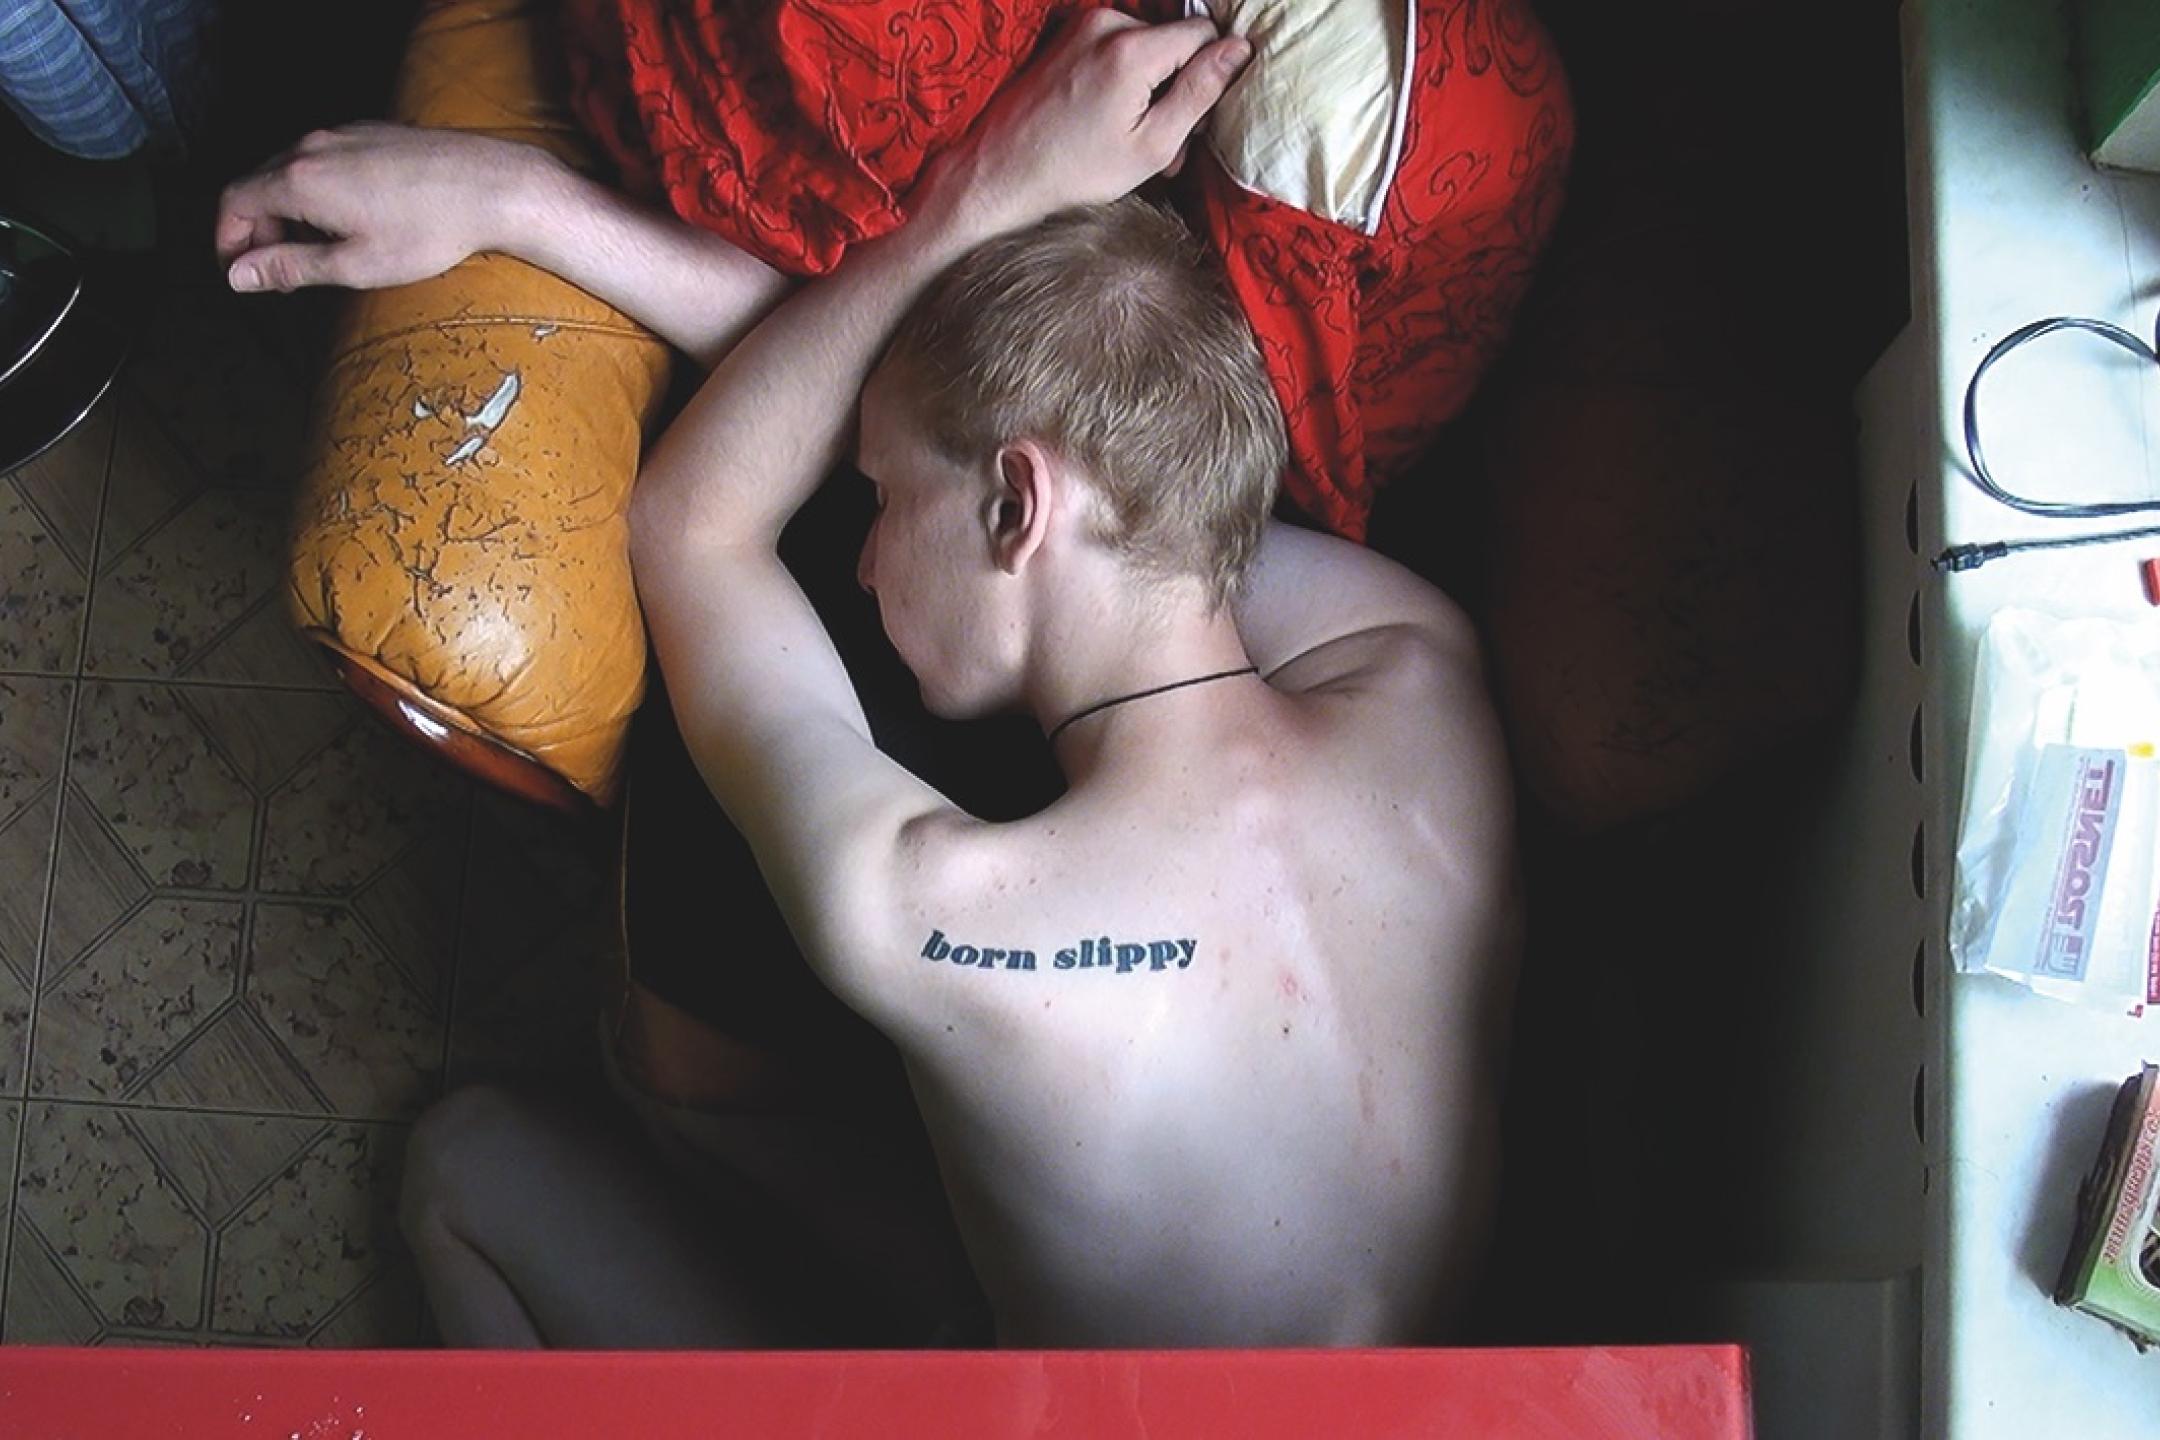 From a bird’s eye view: A male teenager is resting his head on a chair. He does not wear a shirt. On his shoulder, you can see a tattoo of the words "Born slippy".